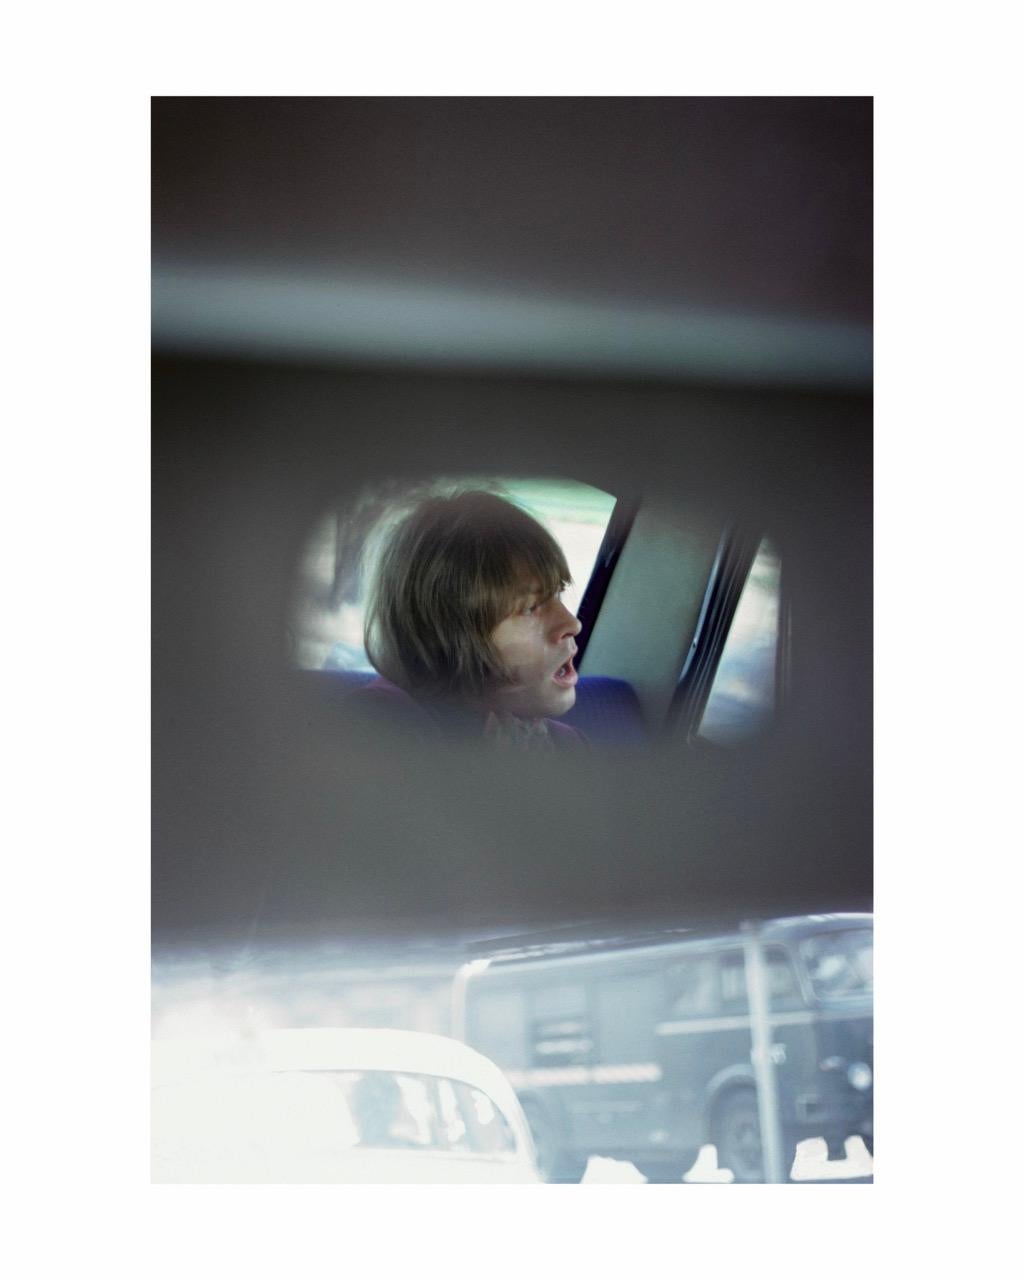 The Rolling Stones guitarist Brian Jones photographed in the back of a chauffeured car on
the way to the band’s concert at the Palazzo dello Sport in Milan, Italy. April 8th, 1967.

Signed limited edition, signed and numbered by Bill Wyman and